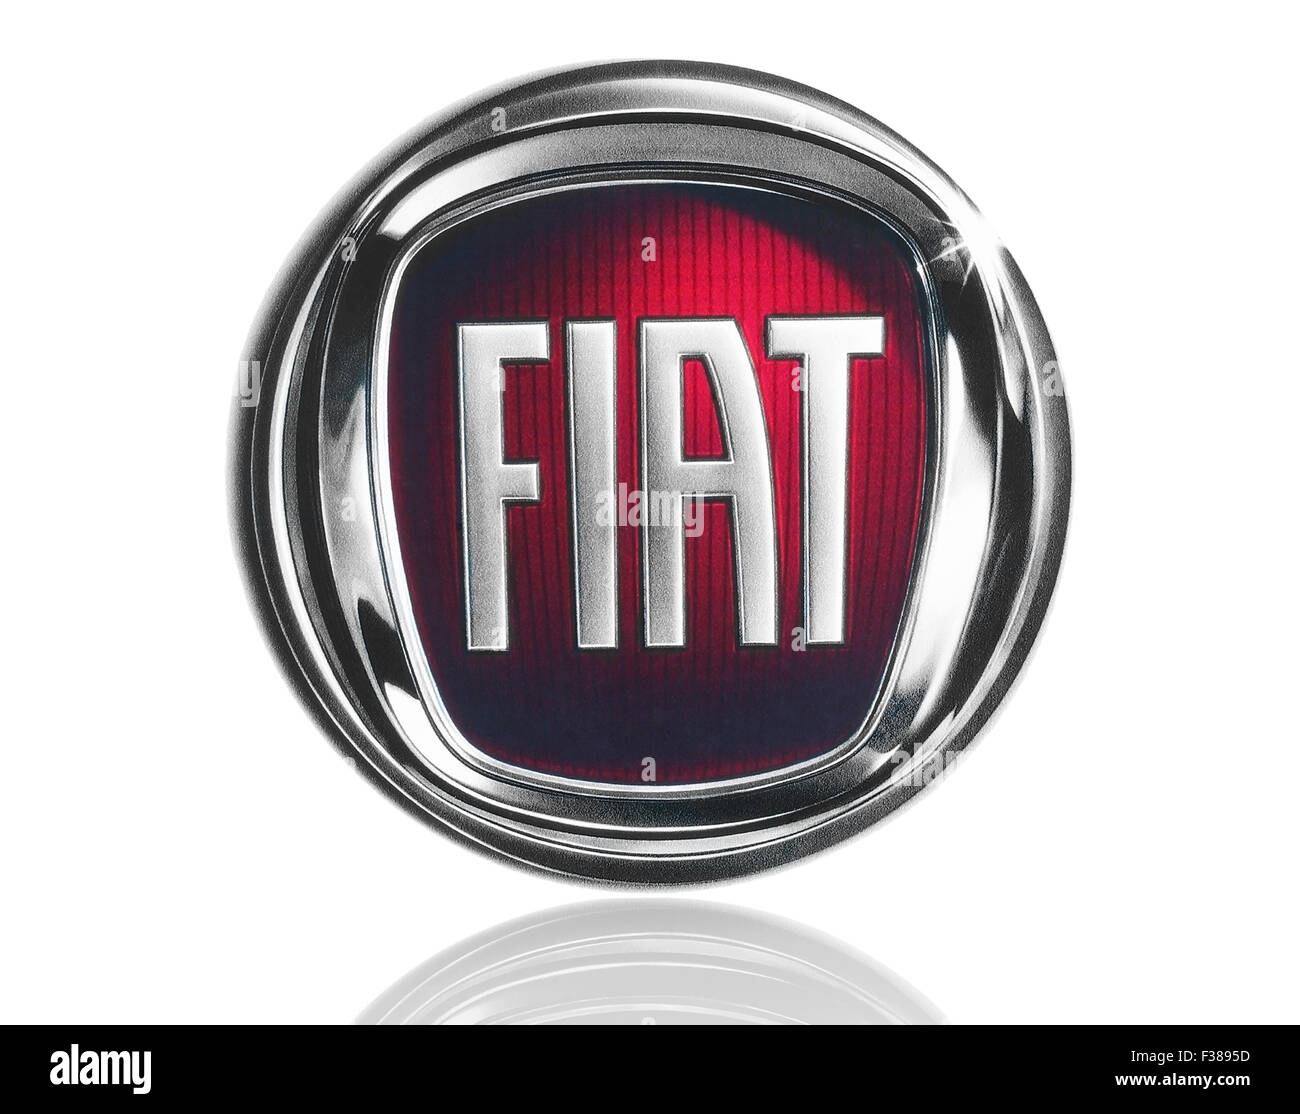 KIEV, UKRAINE - MARCH 21, 2015: Fiat logo printed on paper and placed on white background. Stock Photo